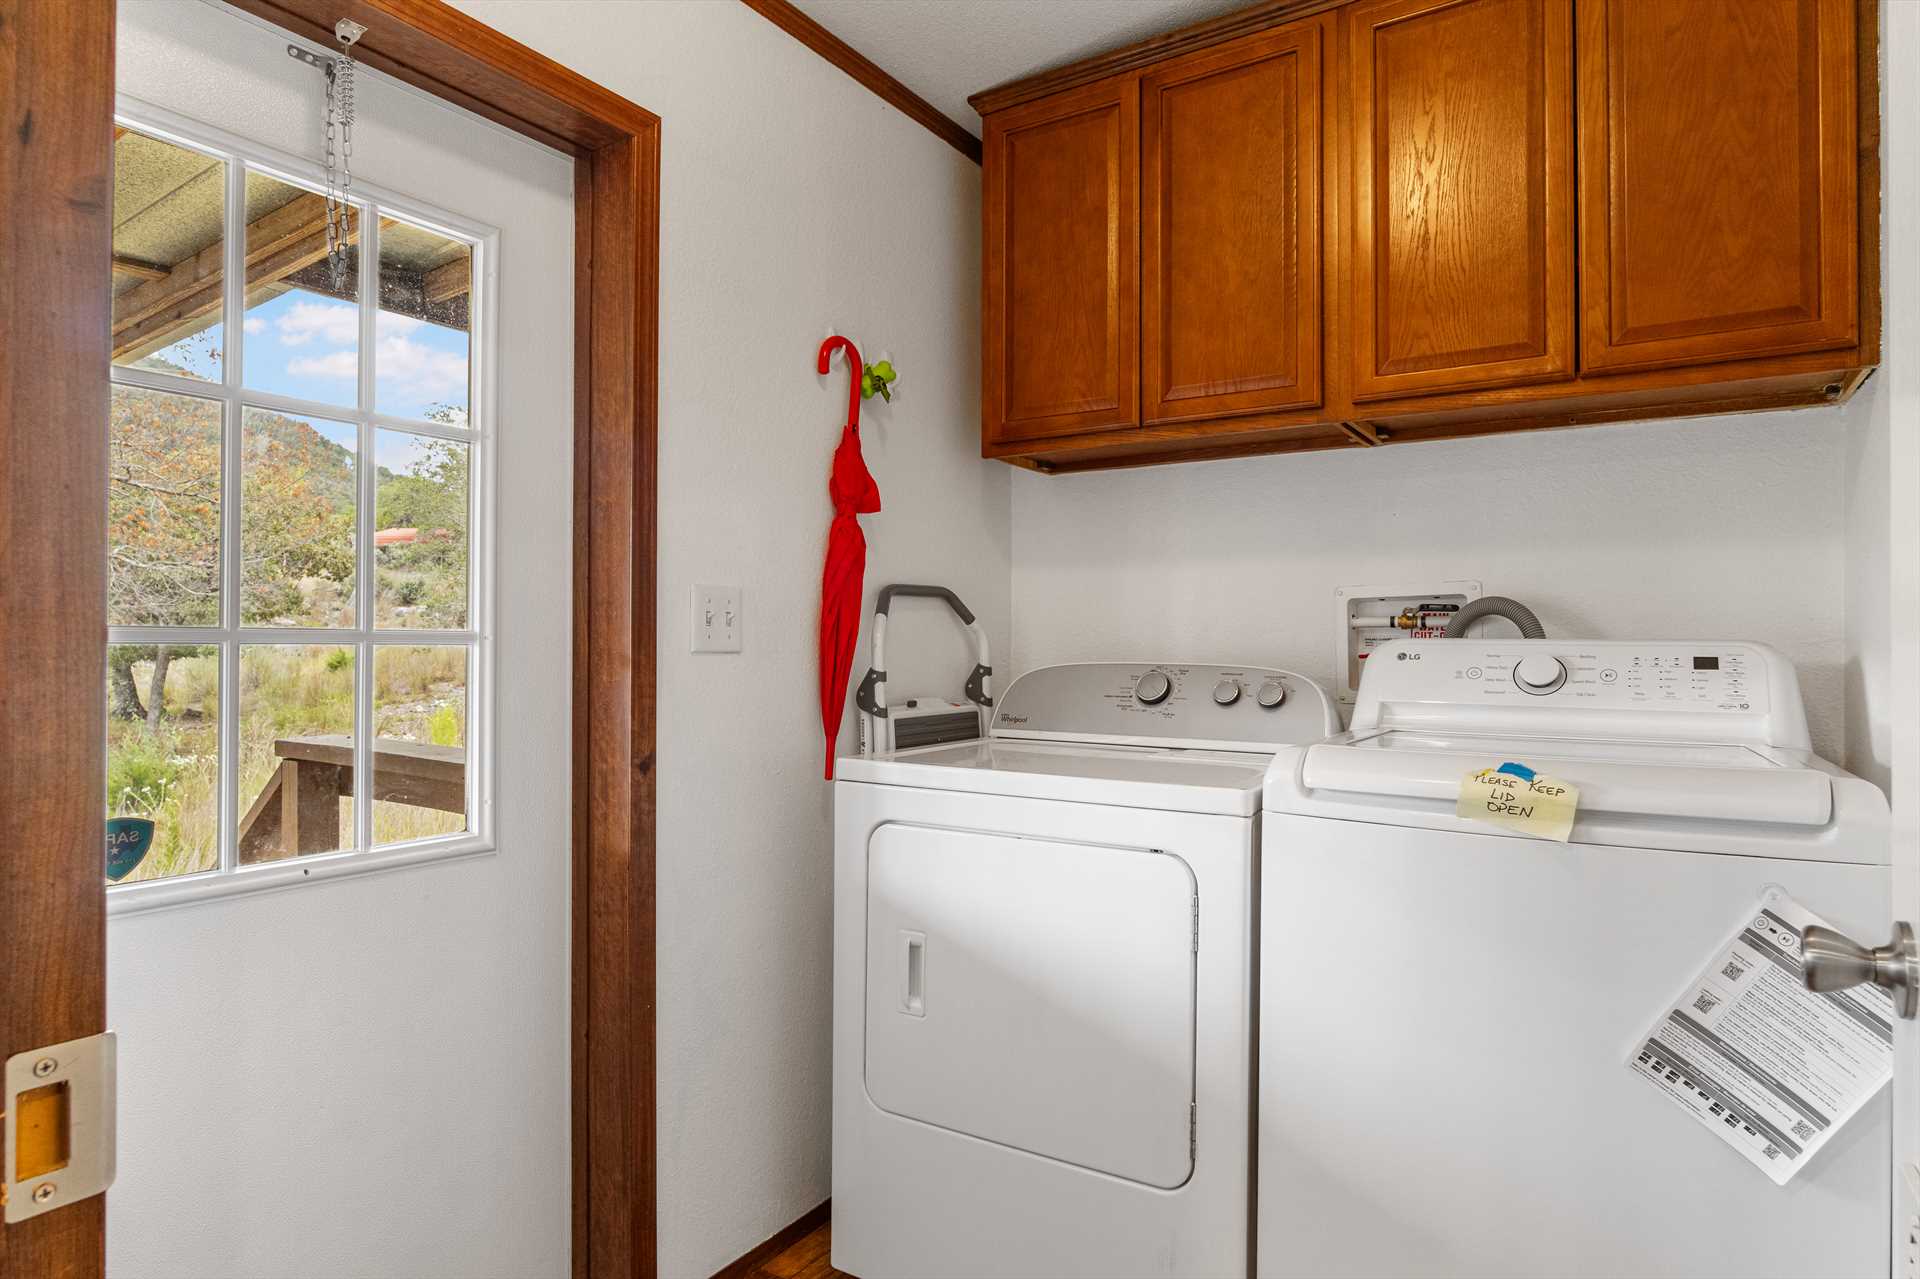                                                 Don't let dirty laundry follow you home! Keep up with it in the Hideaway's handy laundry room.